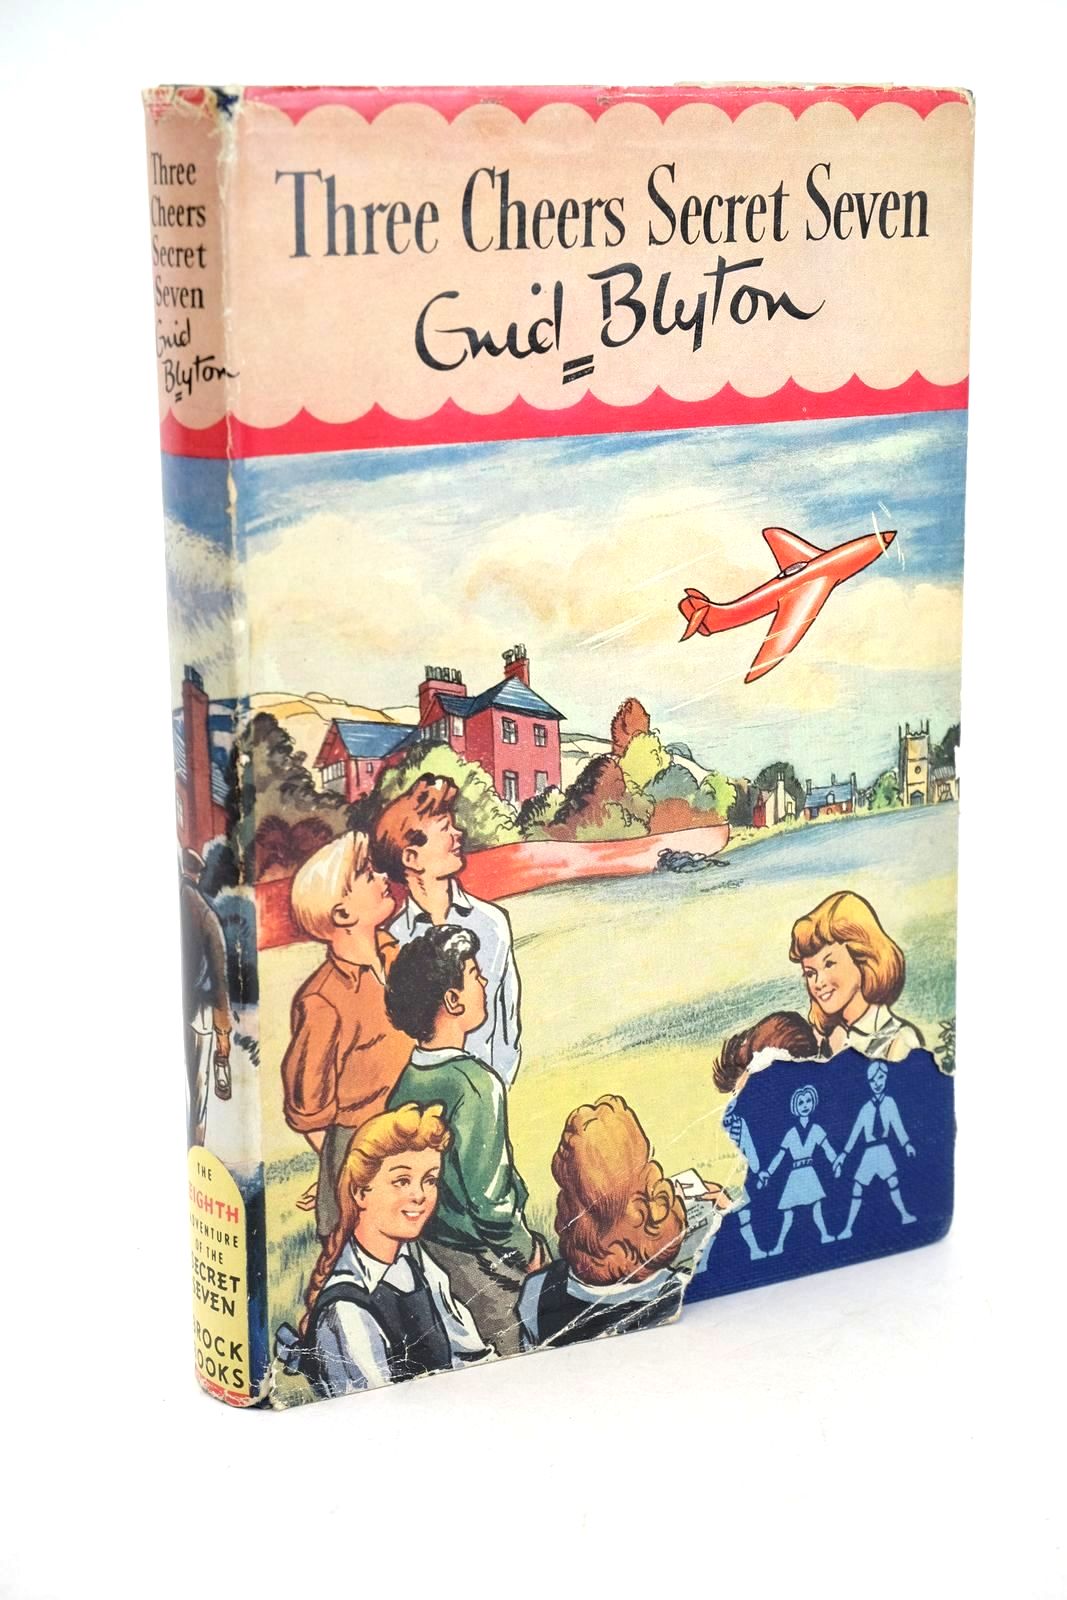 Photo of THREE CHEERS SECRET SEVEN written by Blyton, Enid illustrated by Sharrocks, Burgess published by Brockhampton Press Ltd. (STOCK CODE: 1326869)  for sale by Stella & Rose's Books